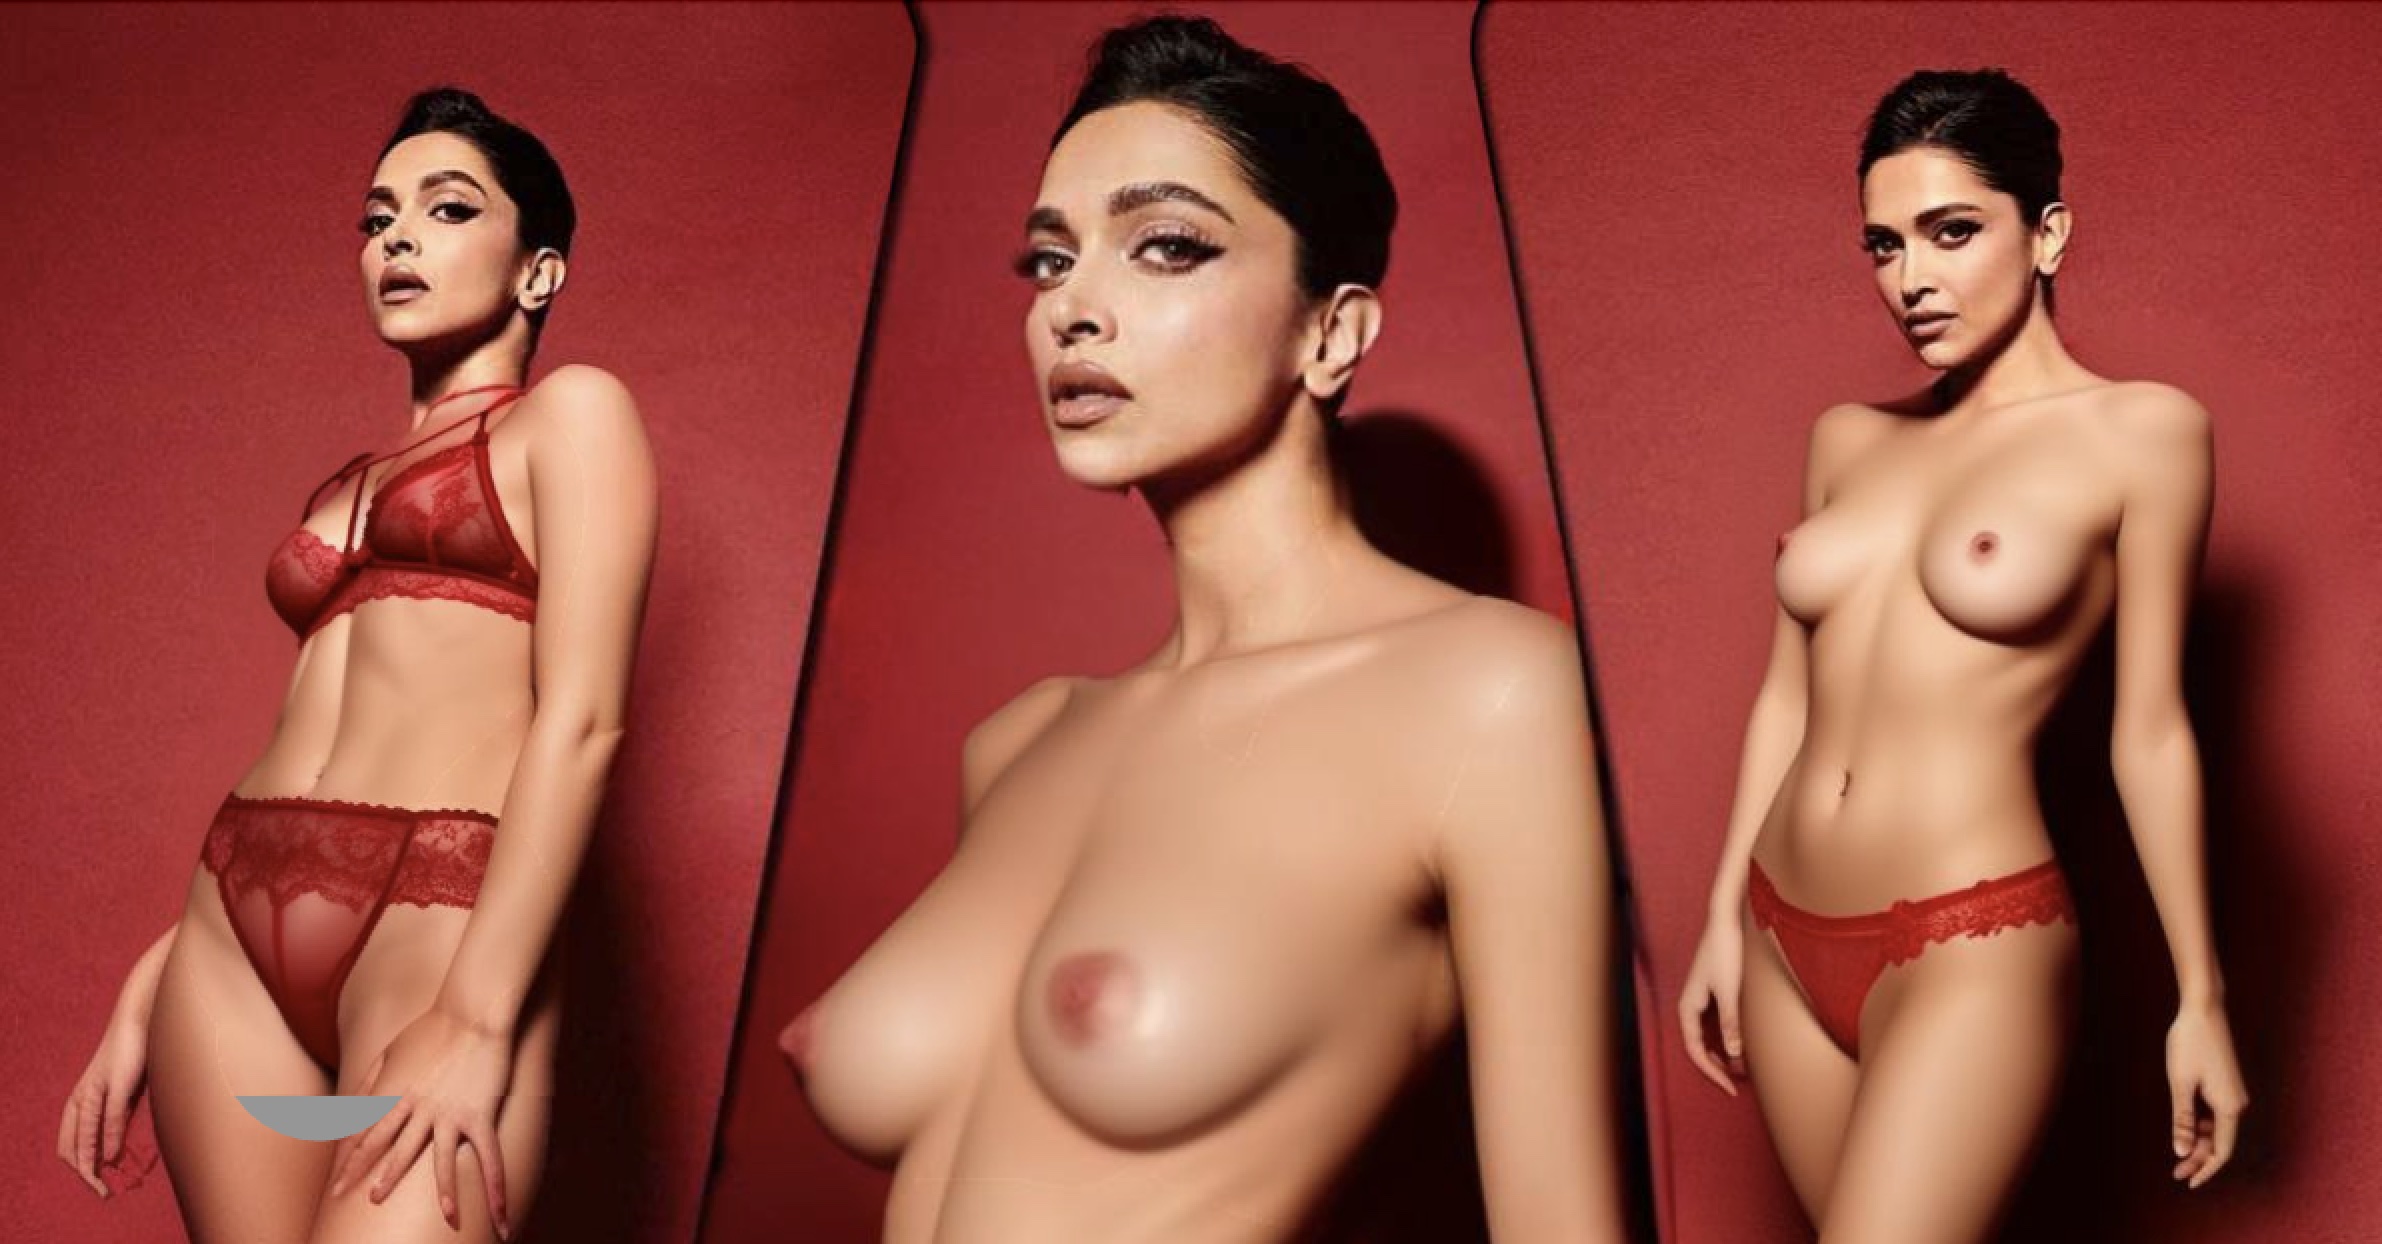 Gorgeous Deepika Padukone Showcases Her Amazing Body In Different Hot Lingerie